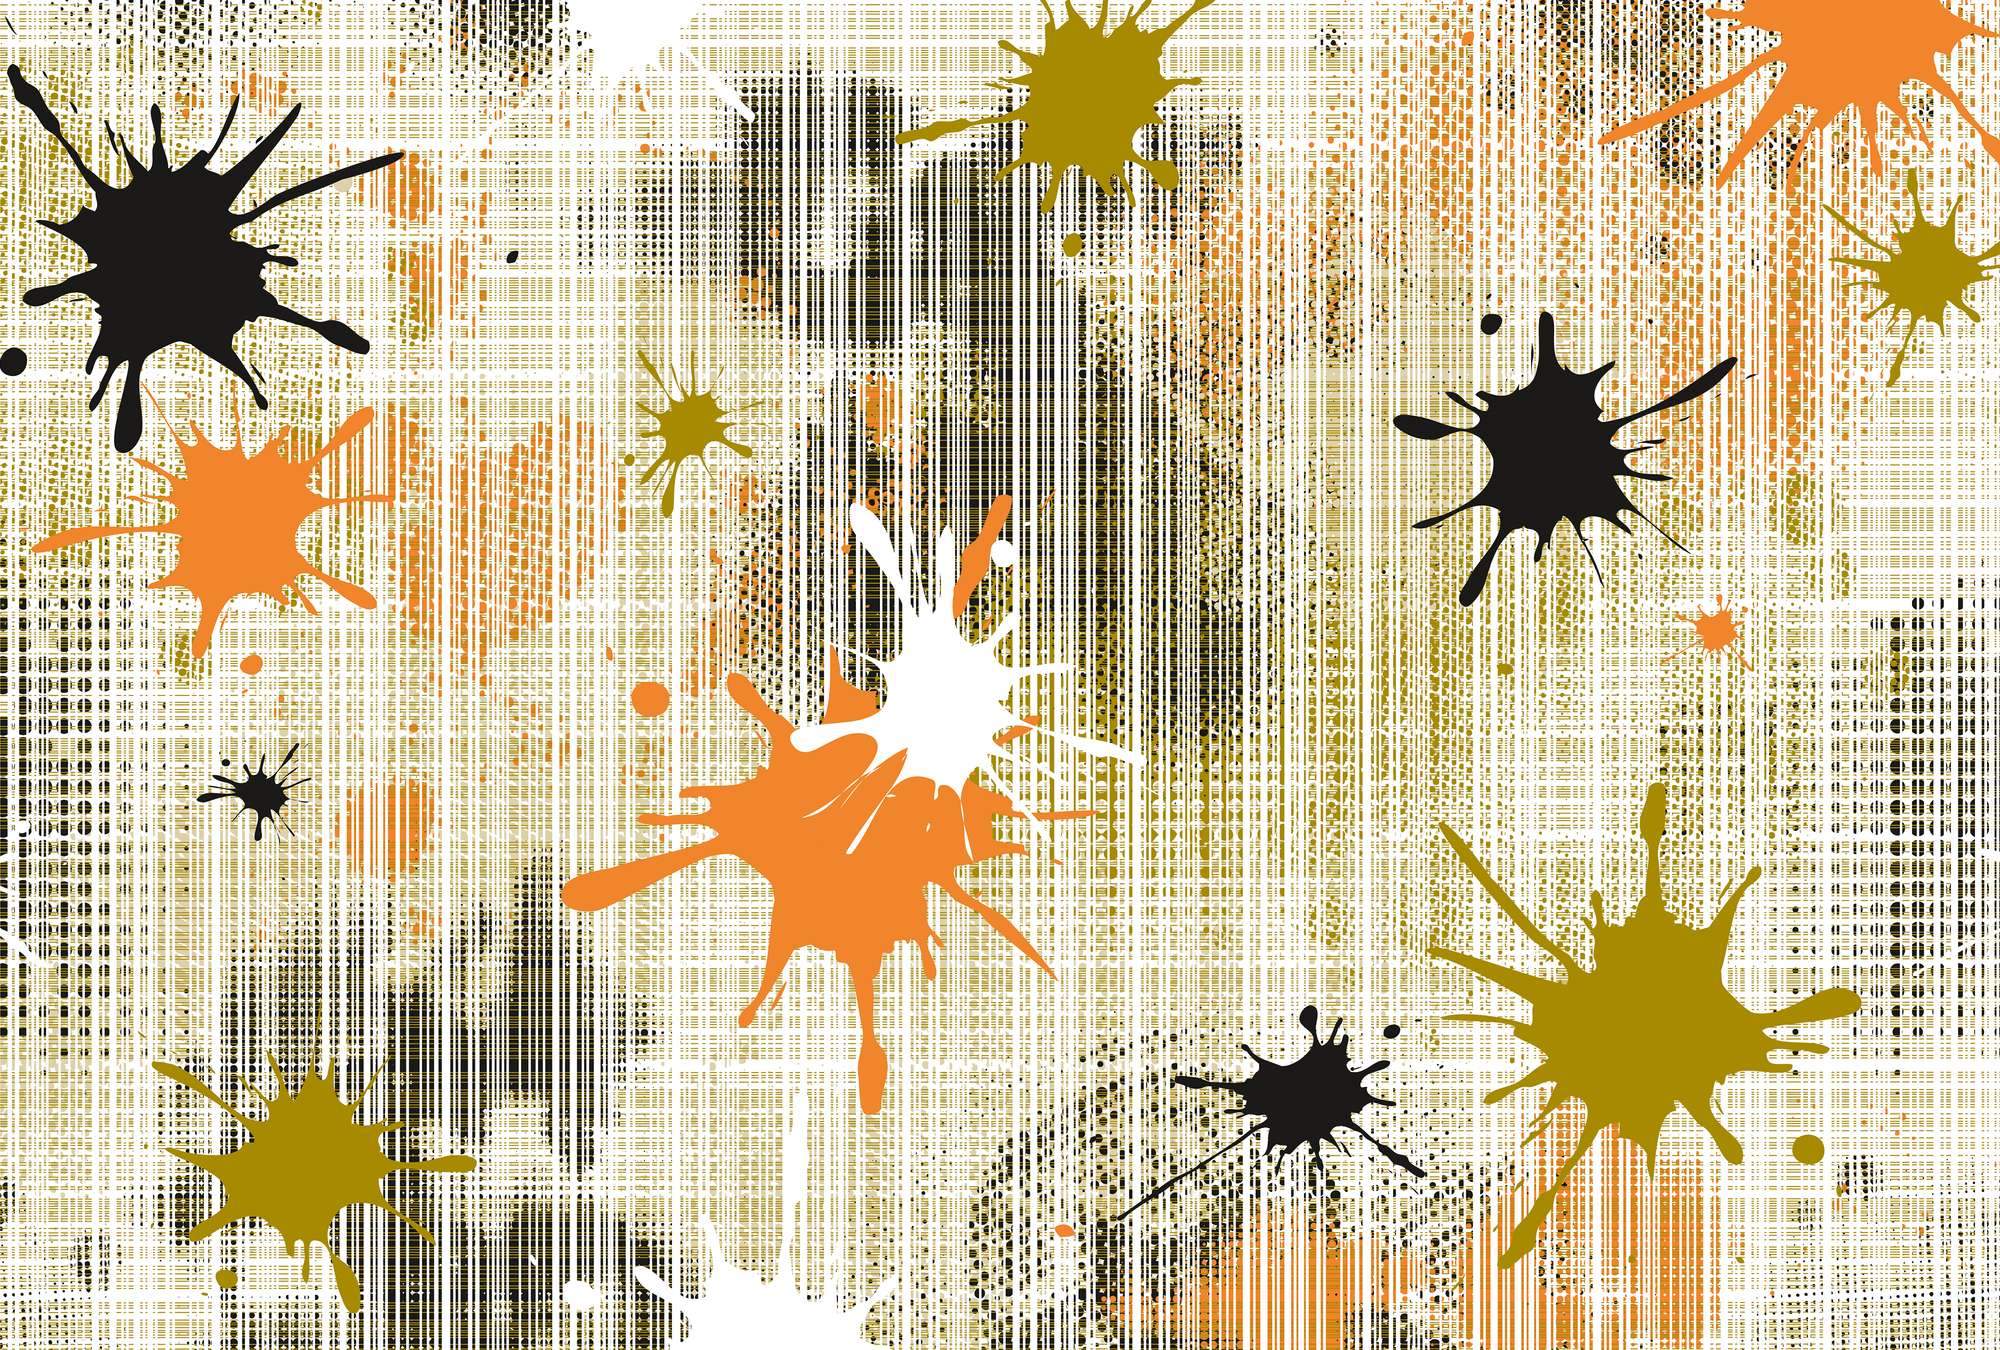             Photo wallpaper graphic design with colourful splashes of paint
        